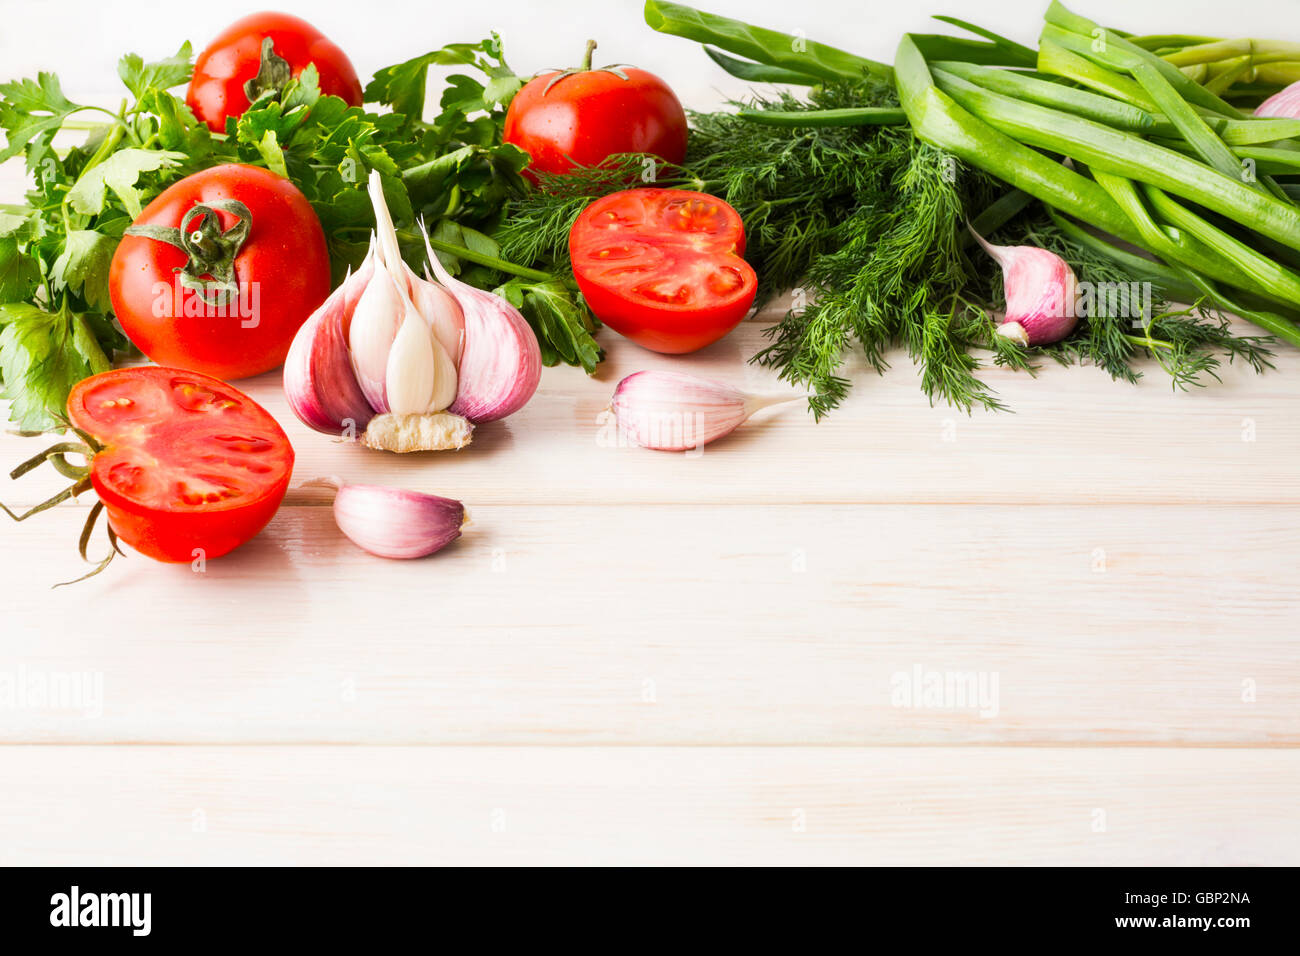 Garlic and tomato on the white wooden background. Vegetarian  vegan food. Healthy eating concept with fresh vegetables. Stock Photo